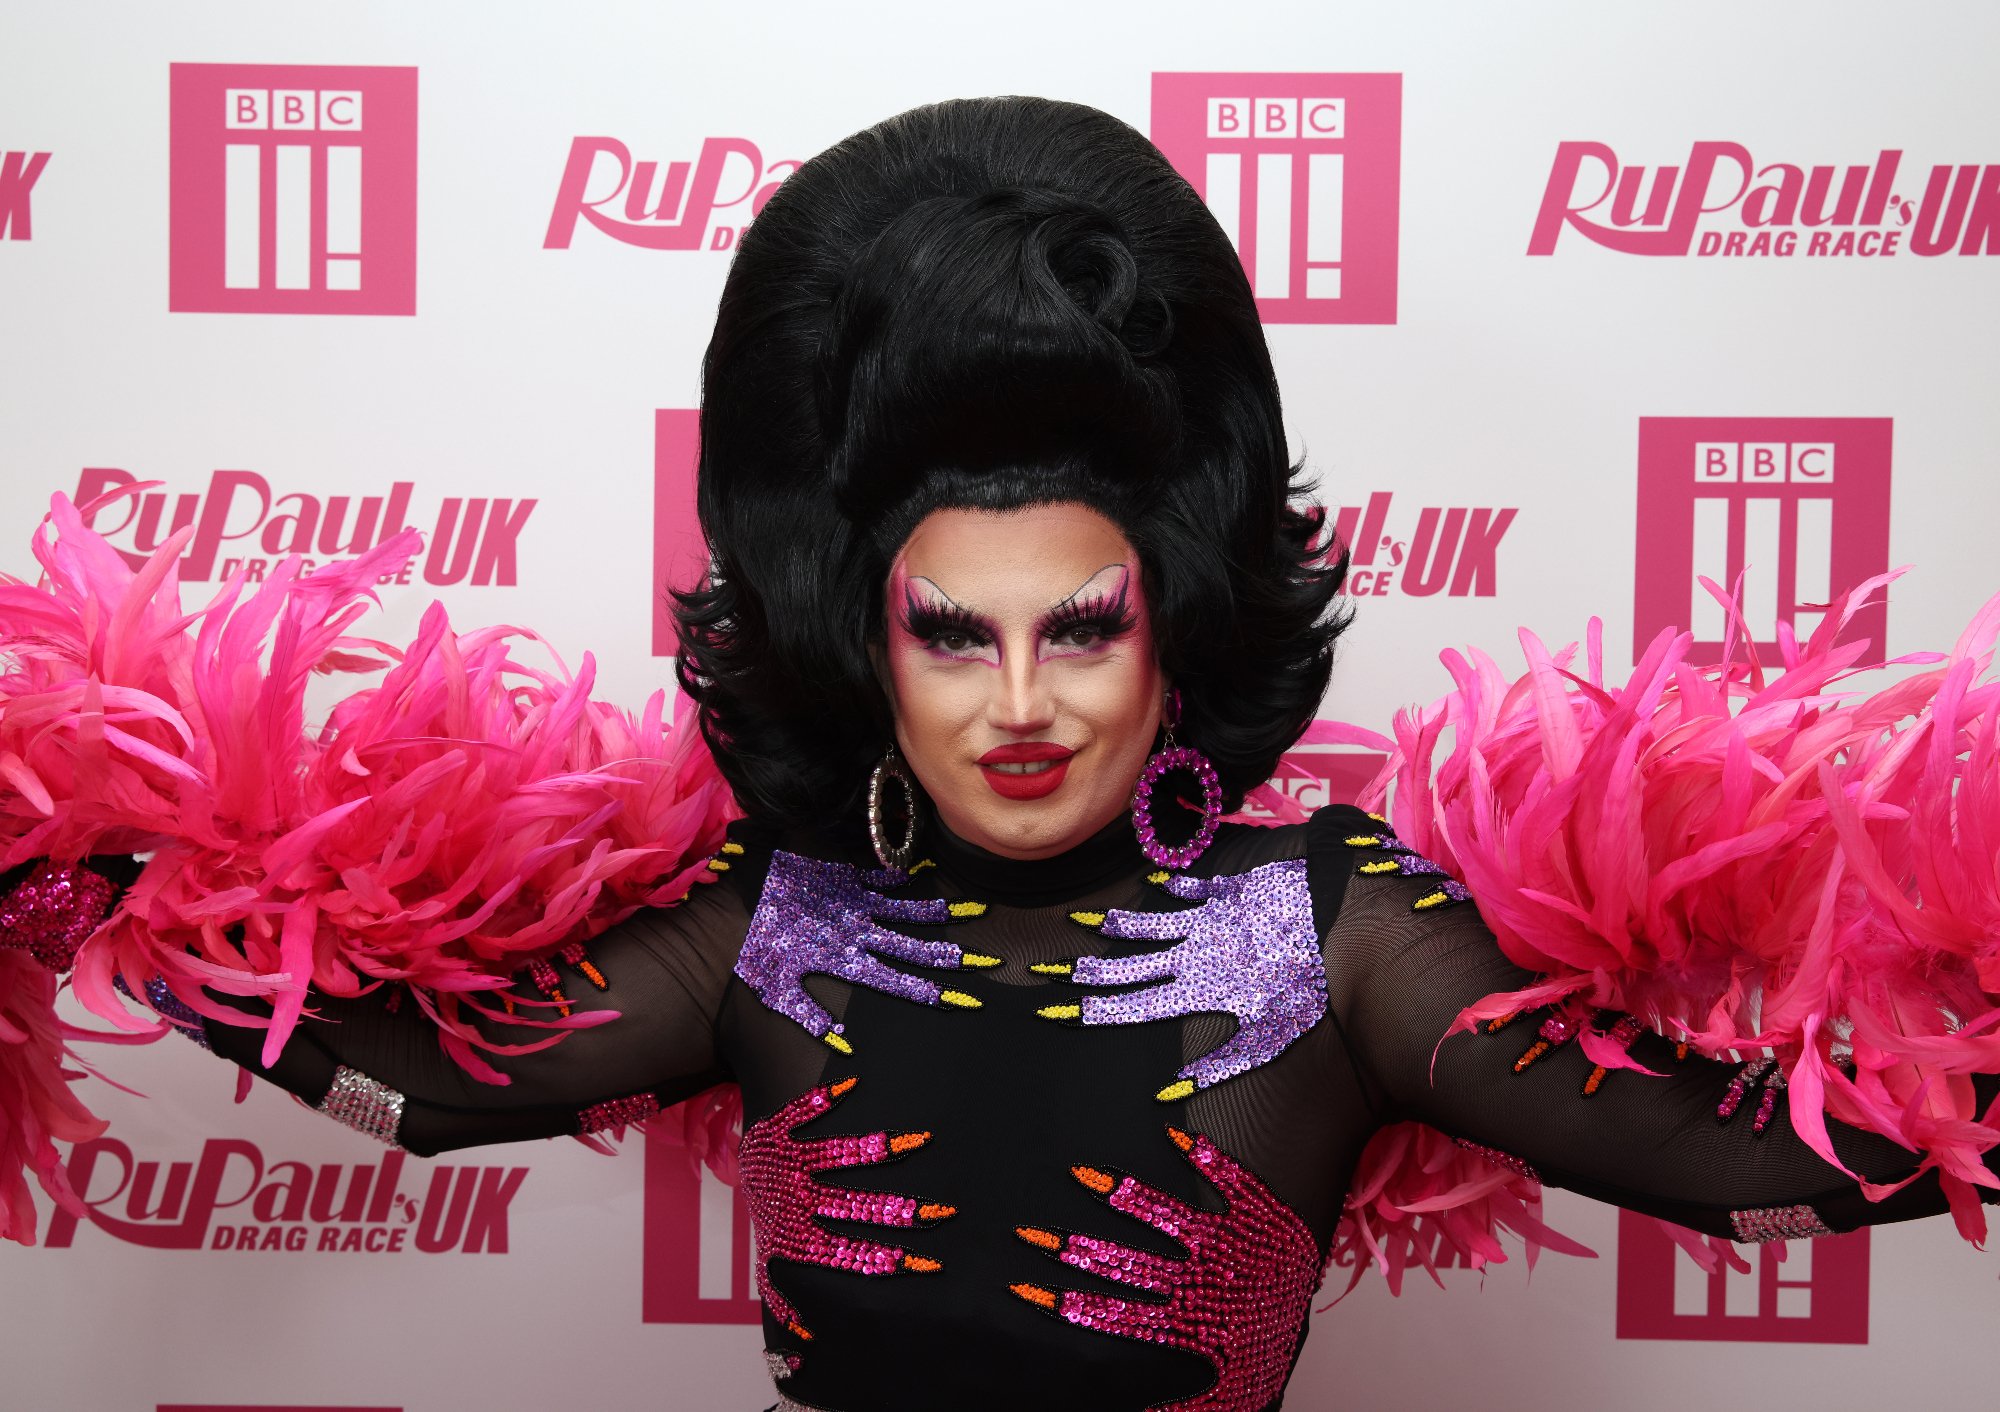 'RuPaul's Drag Race UK' Season 3 drag queen Choriza May with pink feathers